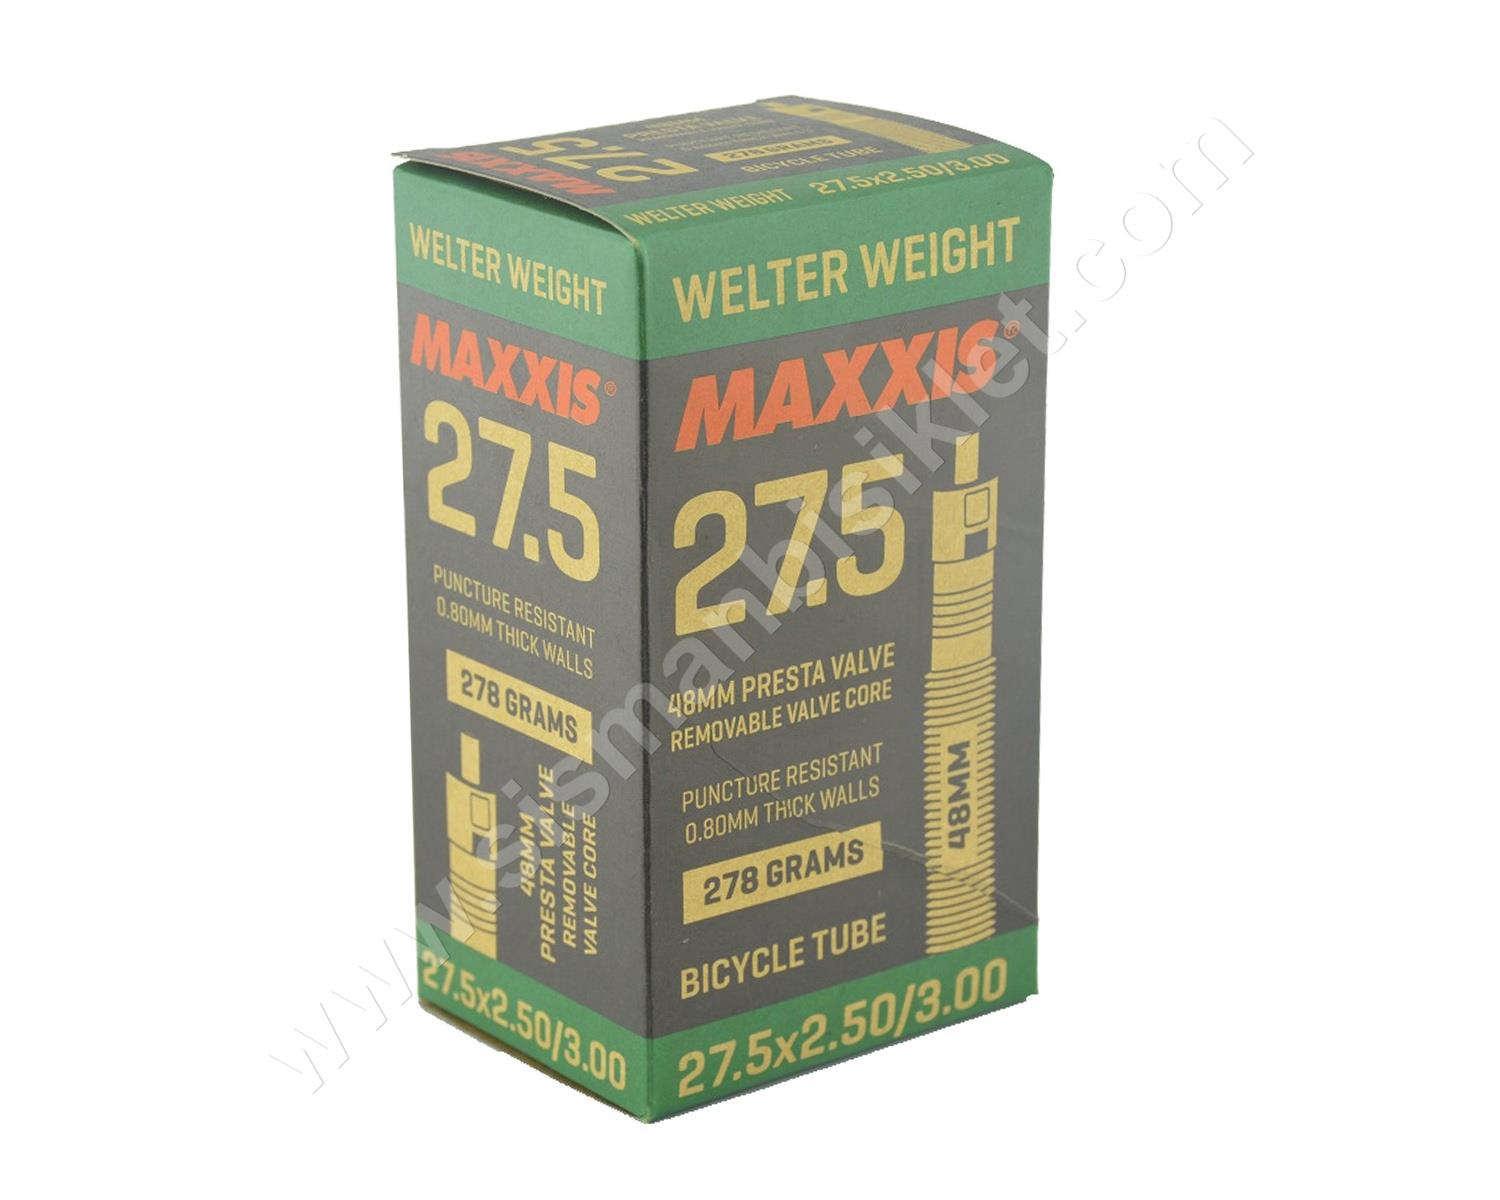 Maxxis 27.5x2.30-3.00 FV48mm Welter Weight İnce Sibop İç Lastik